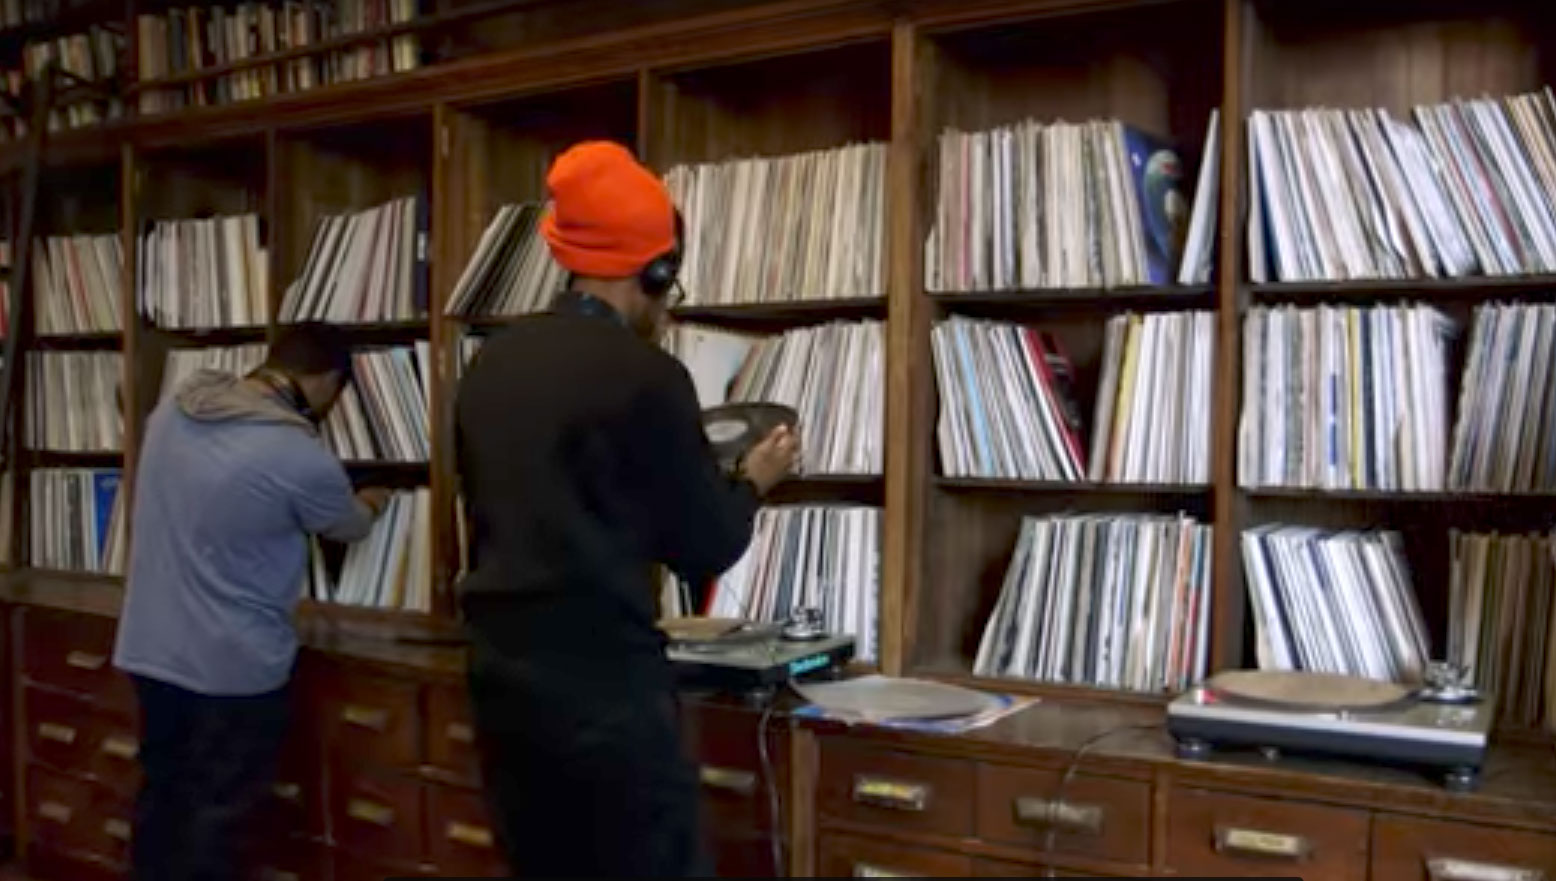 Frankie Knuckles' record collection at the Stony Island Arts Bank, as shown in the new Art21 video